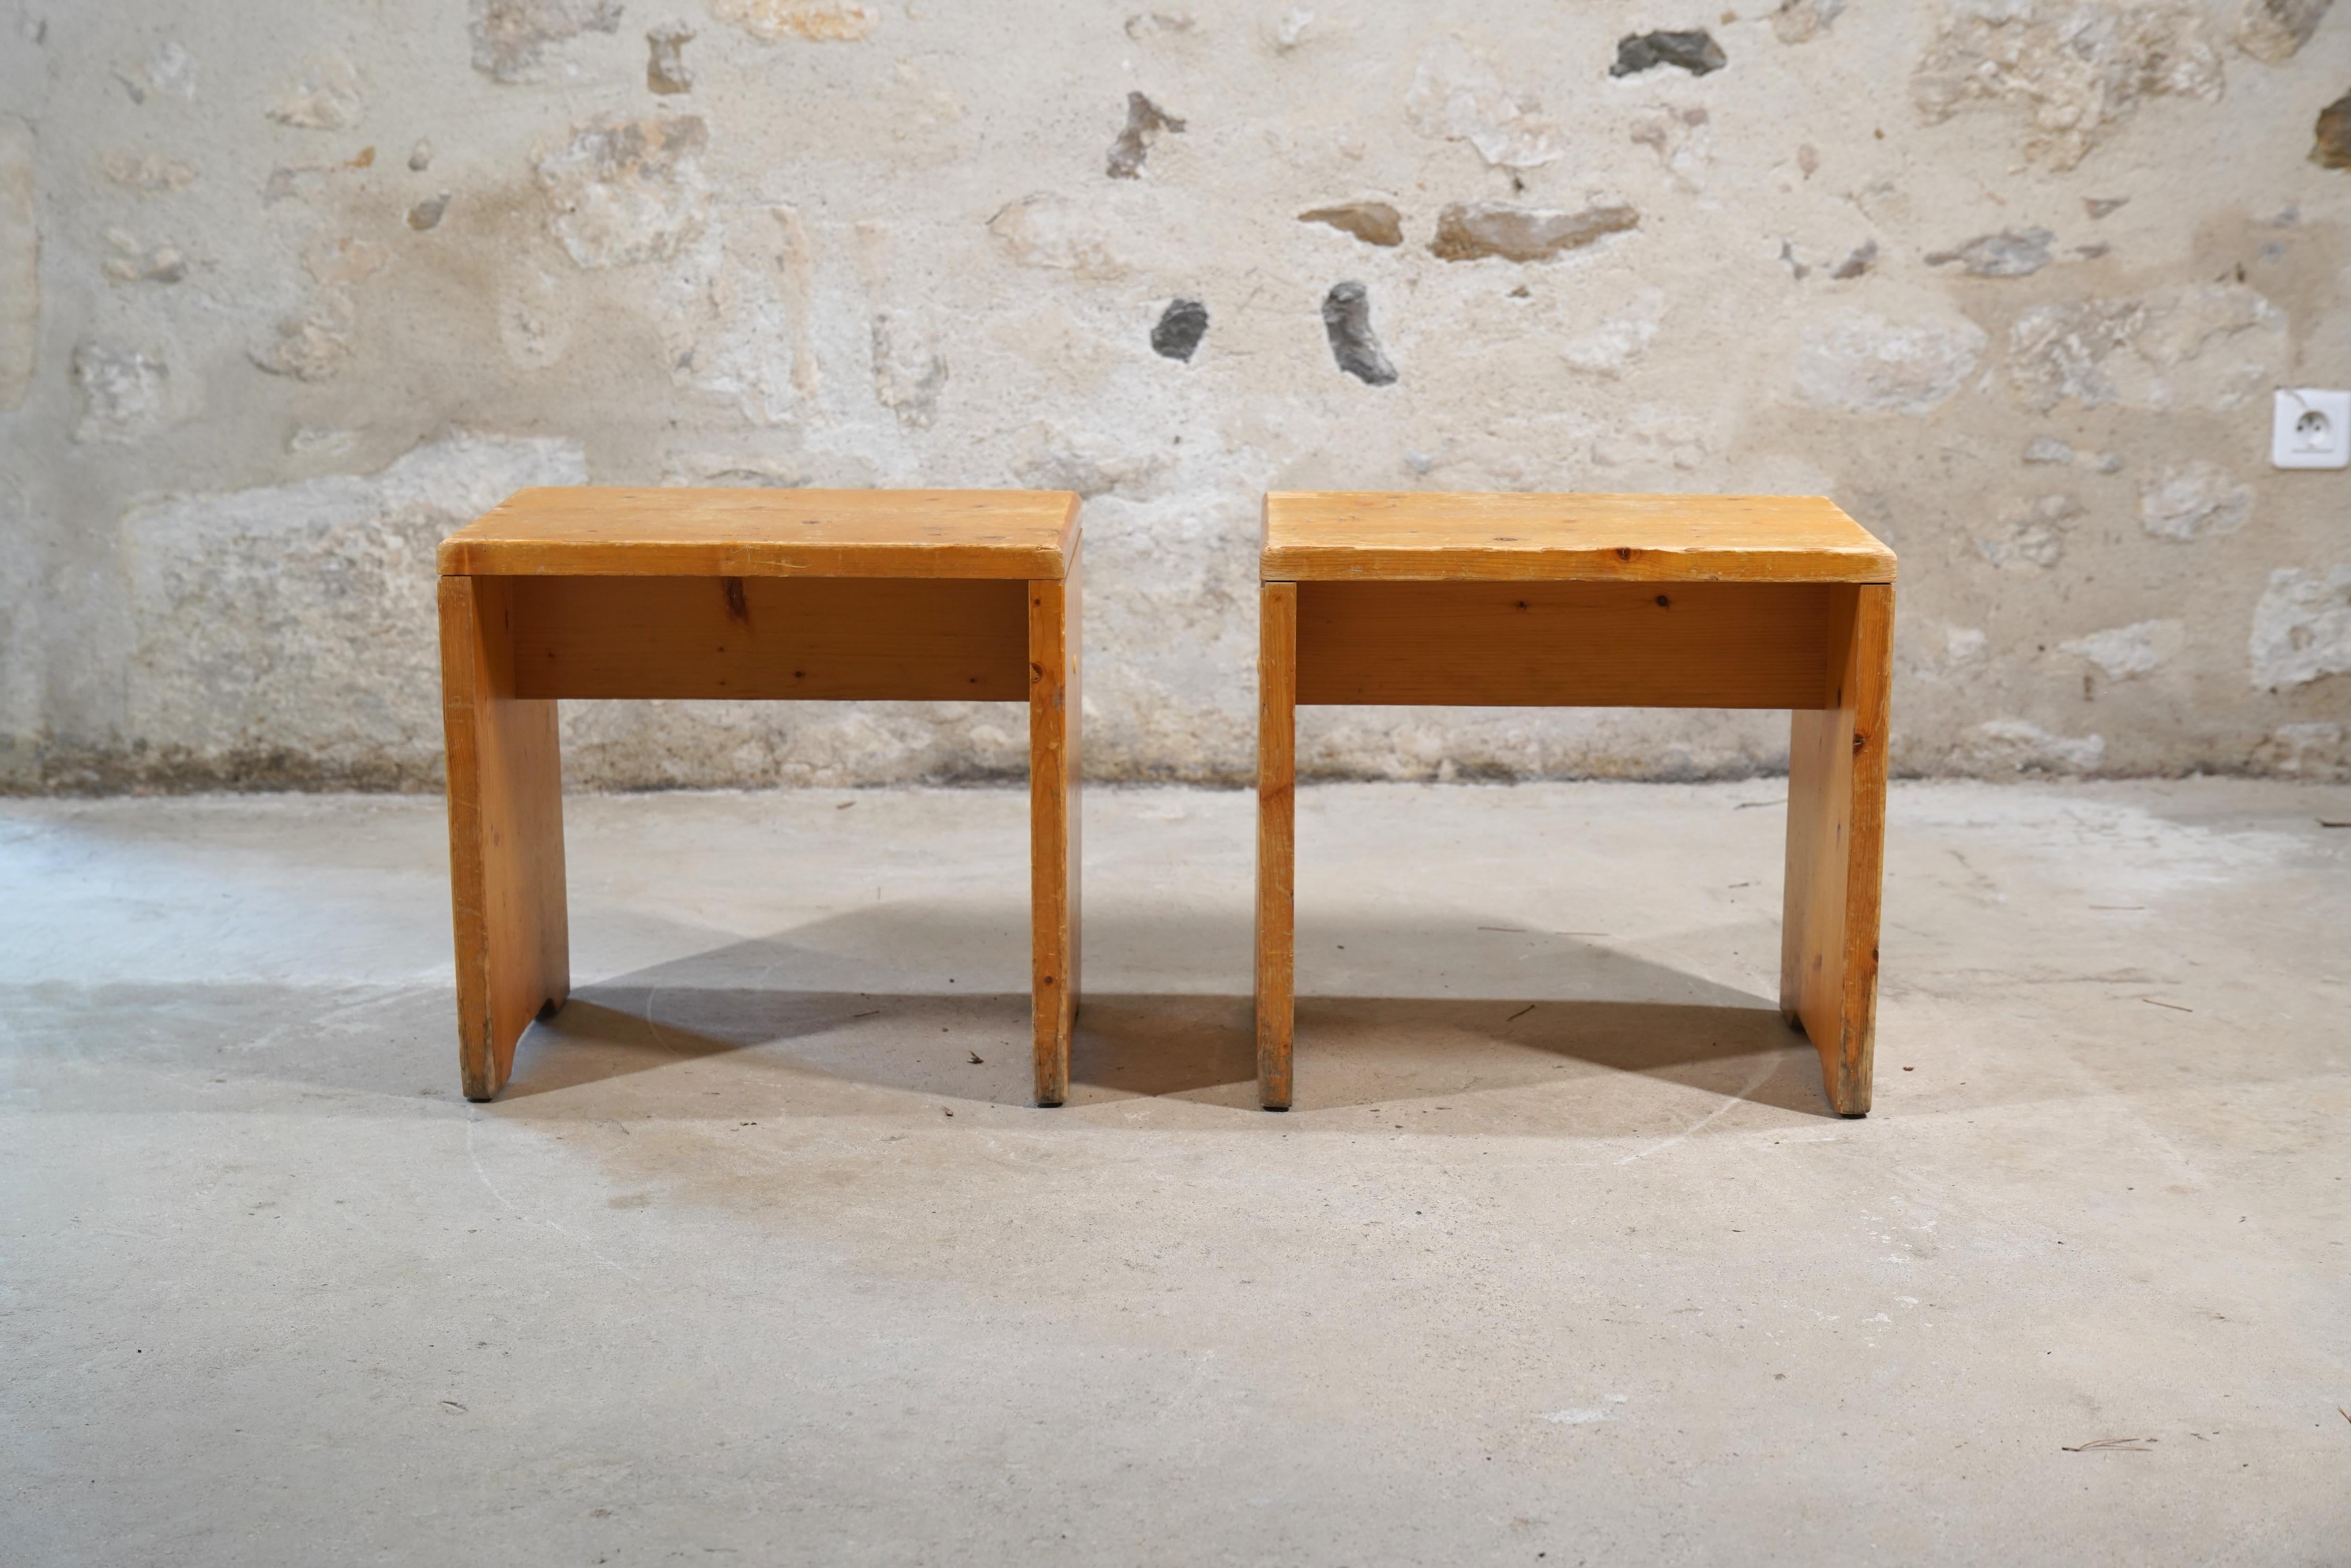 Charlotte Perriand Stools from Les Arcs, France circa 1968 (4 Available) In Good Condition For Sale In Malibu, US